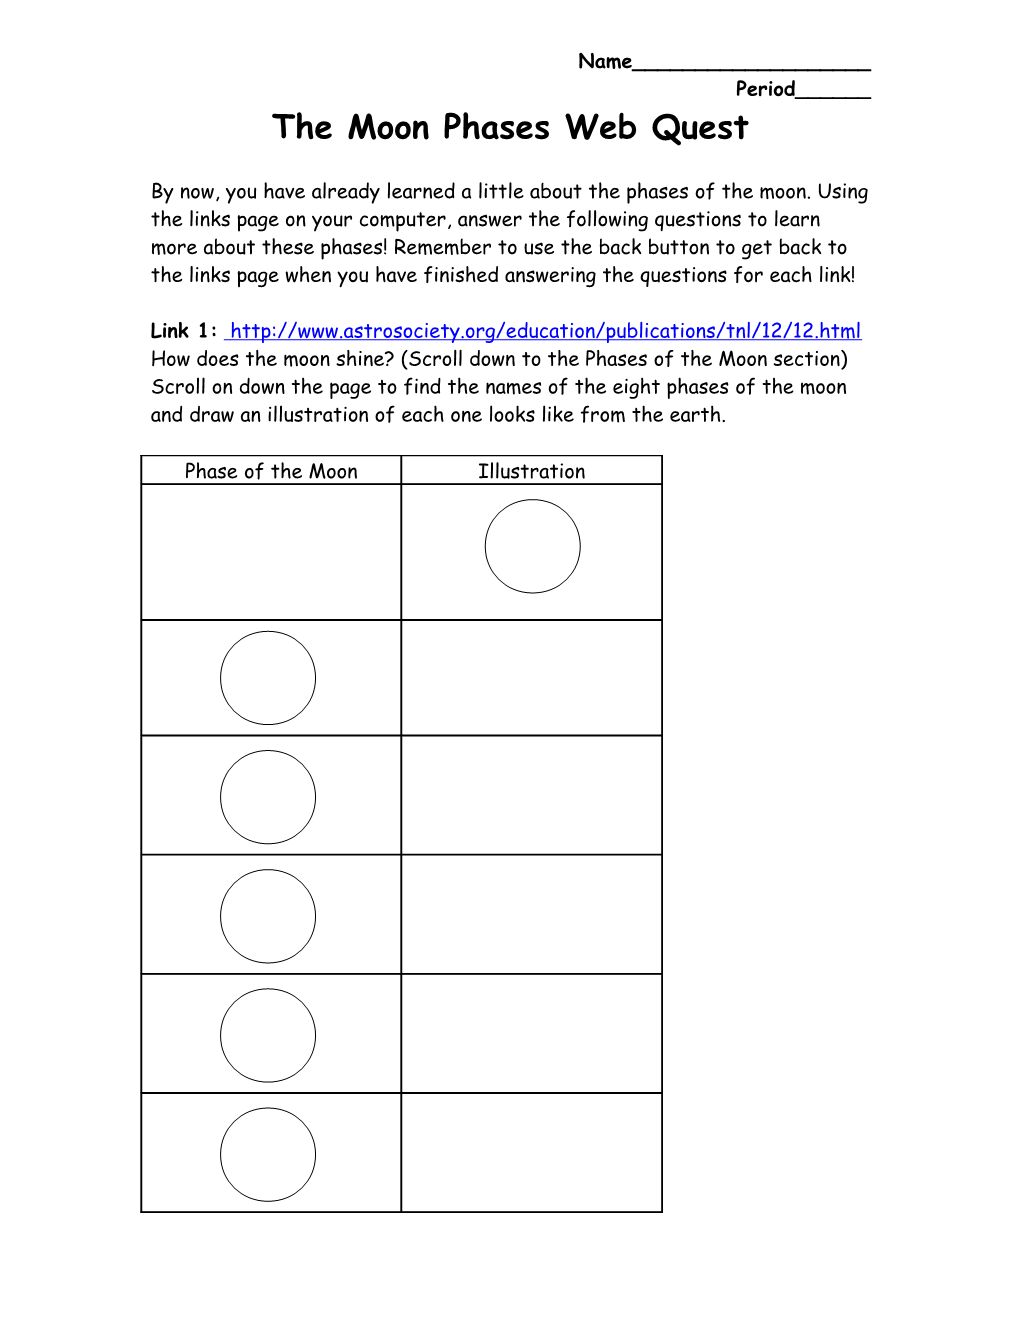 The Moon Phases Web Quest